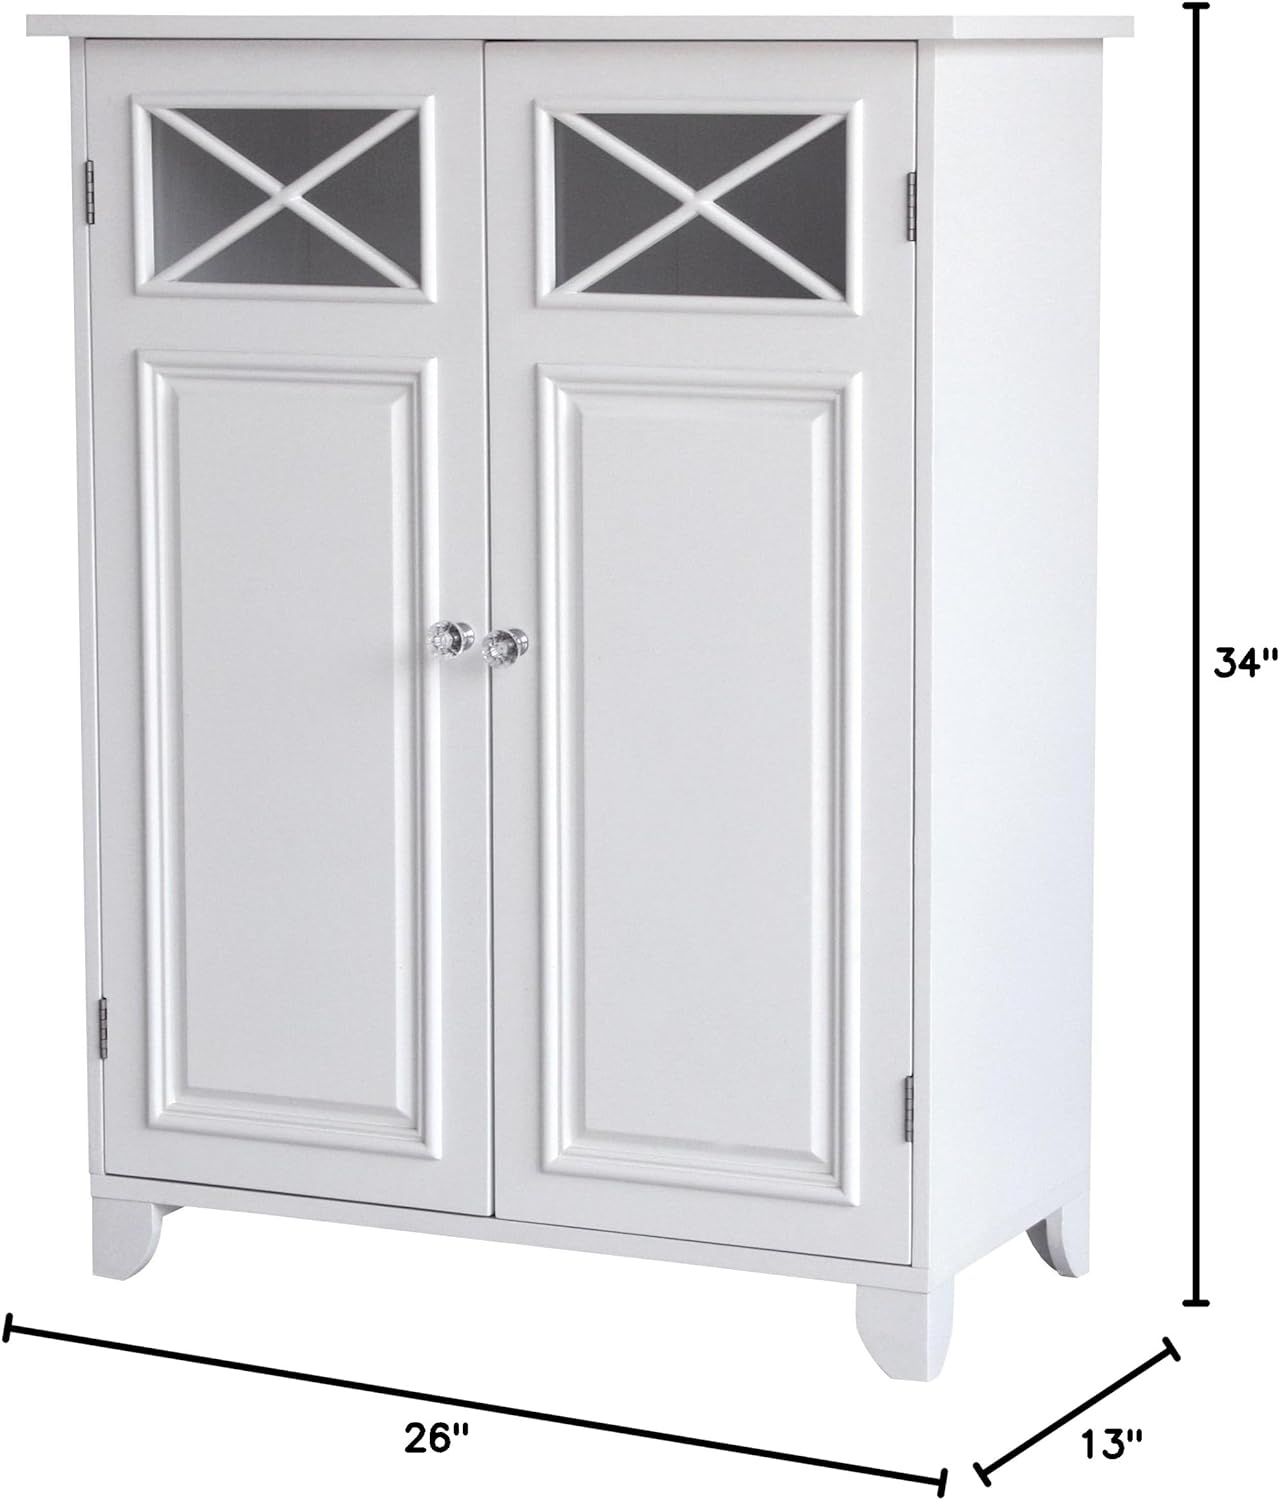 Teamson Home Dawson Wooden Floor Cabinet with Cross Molding and 2 Doors, White - image 9 of 9